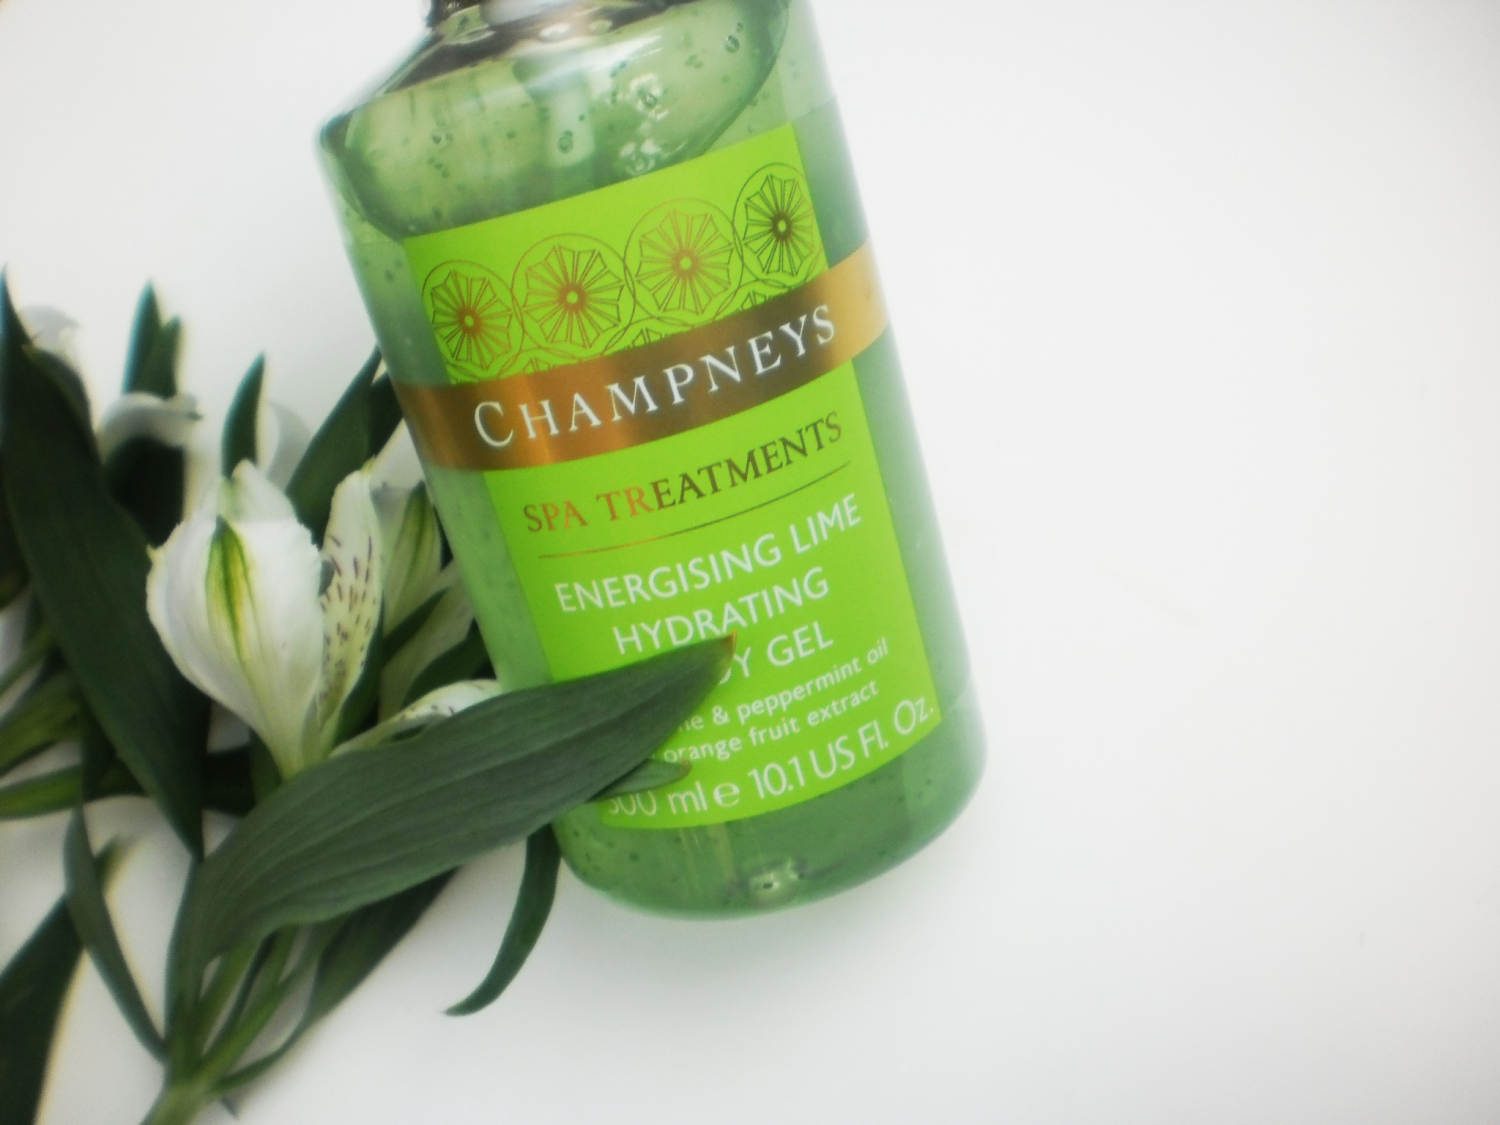 Review: Champneys Energising Lime Hydrating Body Gel